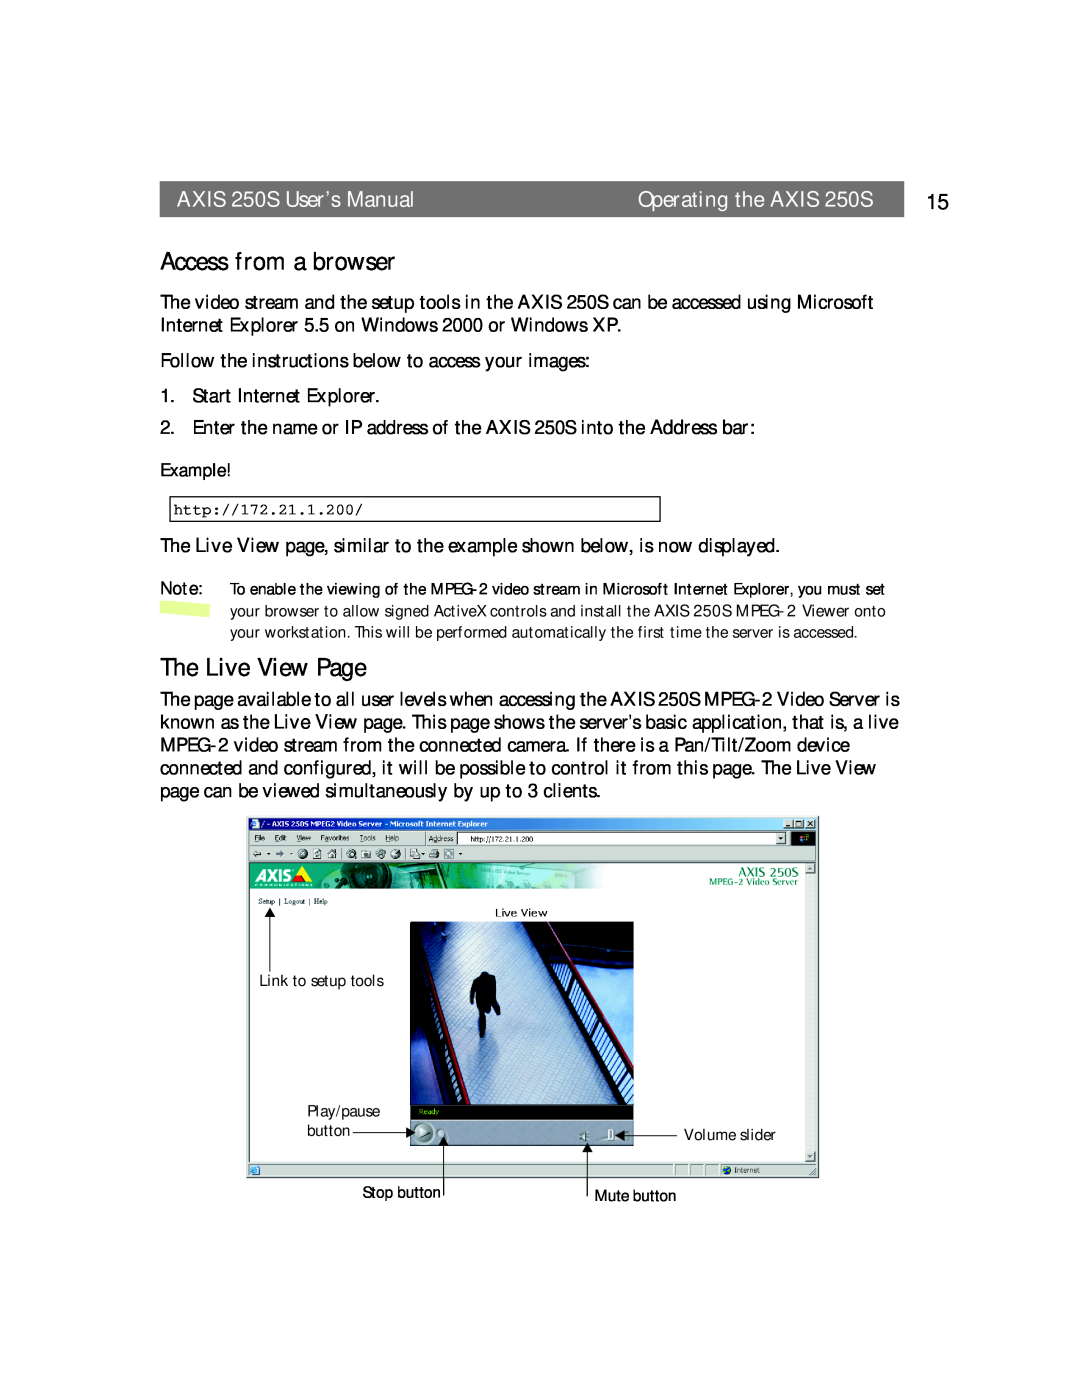 Axis Communications user manual Access from a browser, The Live View Page, Example, AXIS 250S User’s Manual 